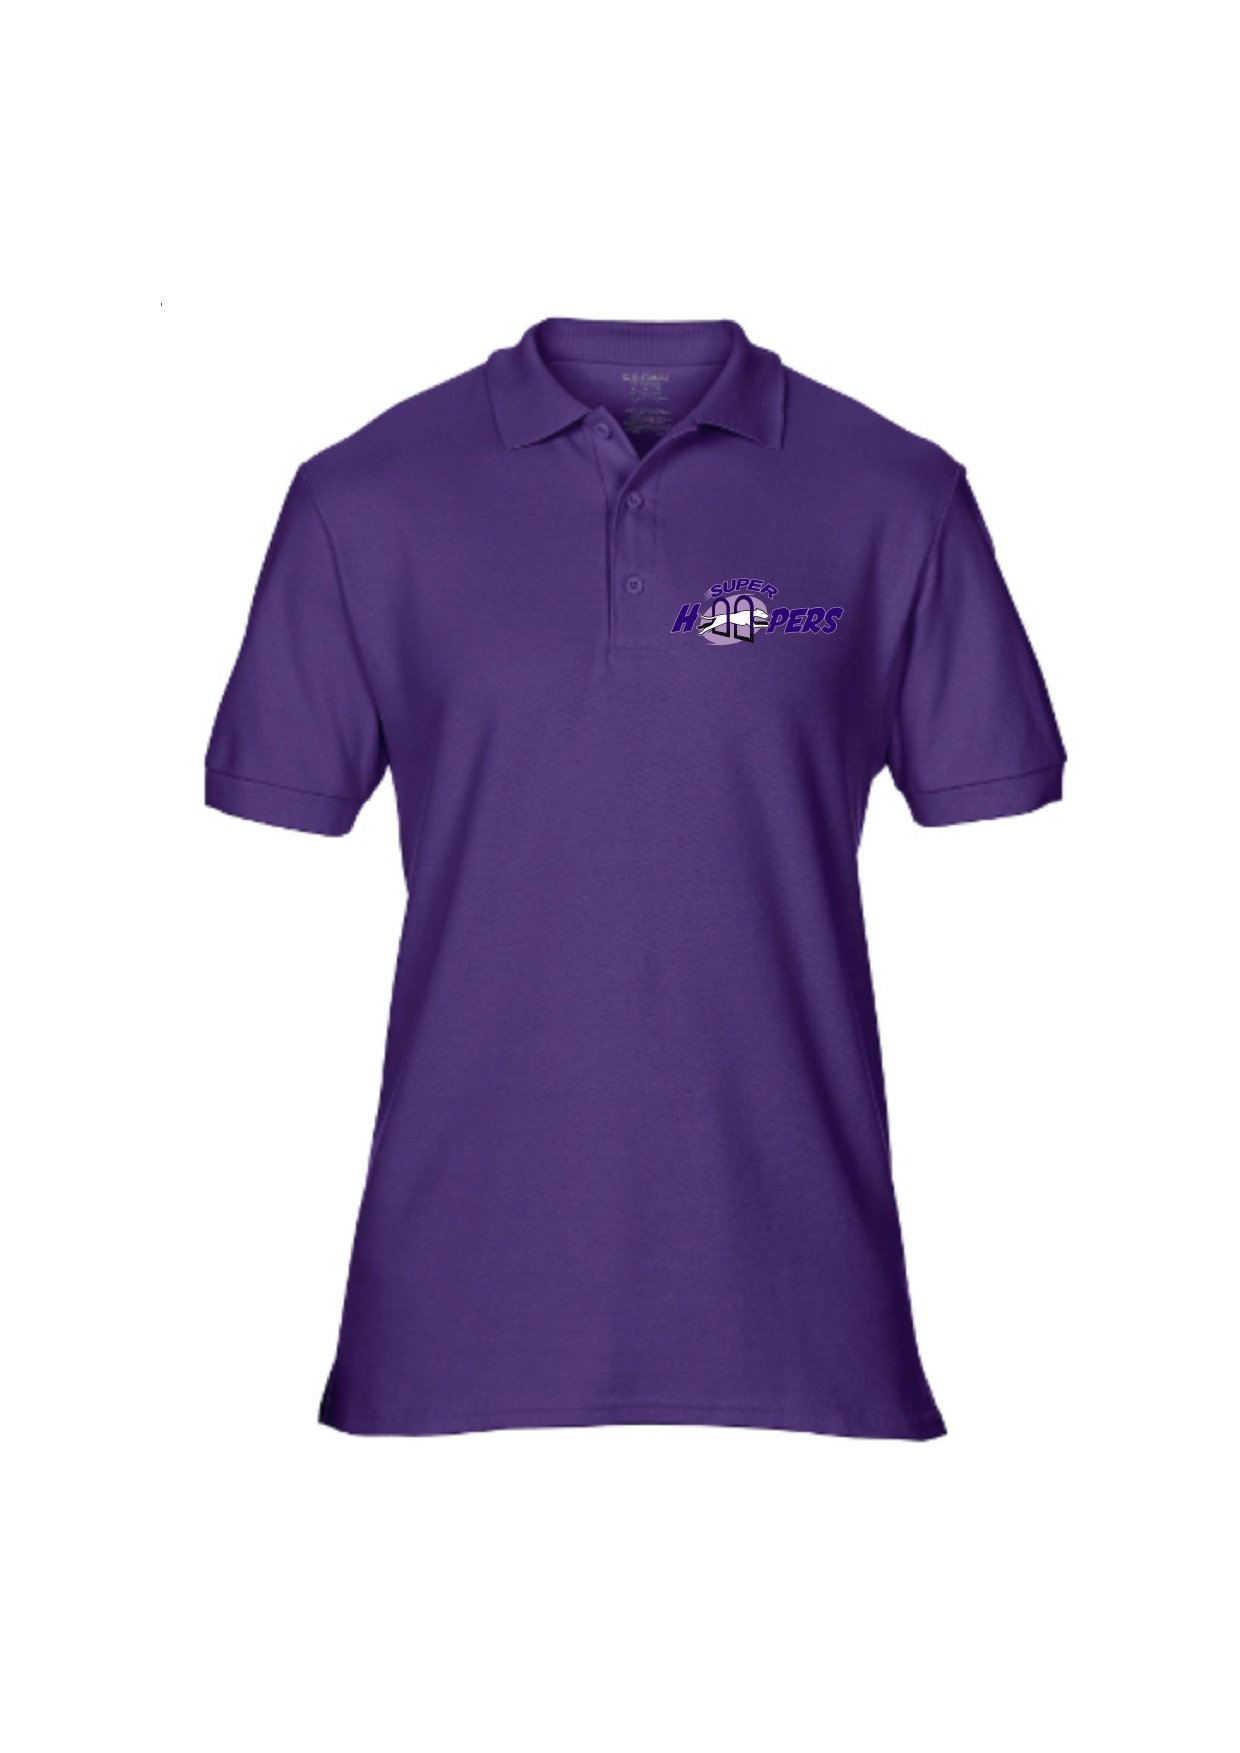 Super Hoopers Polo shirt Small – Purple – Pooch